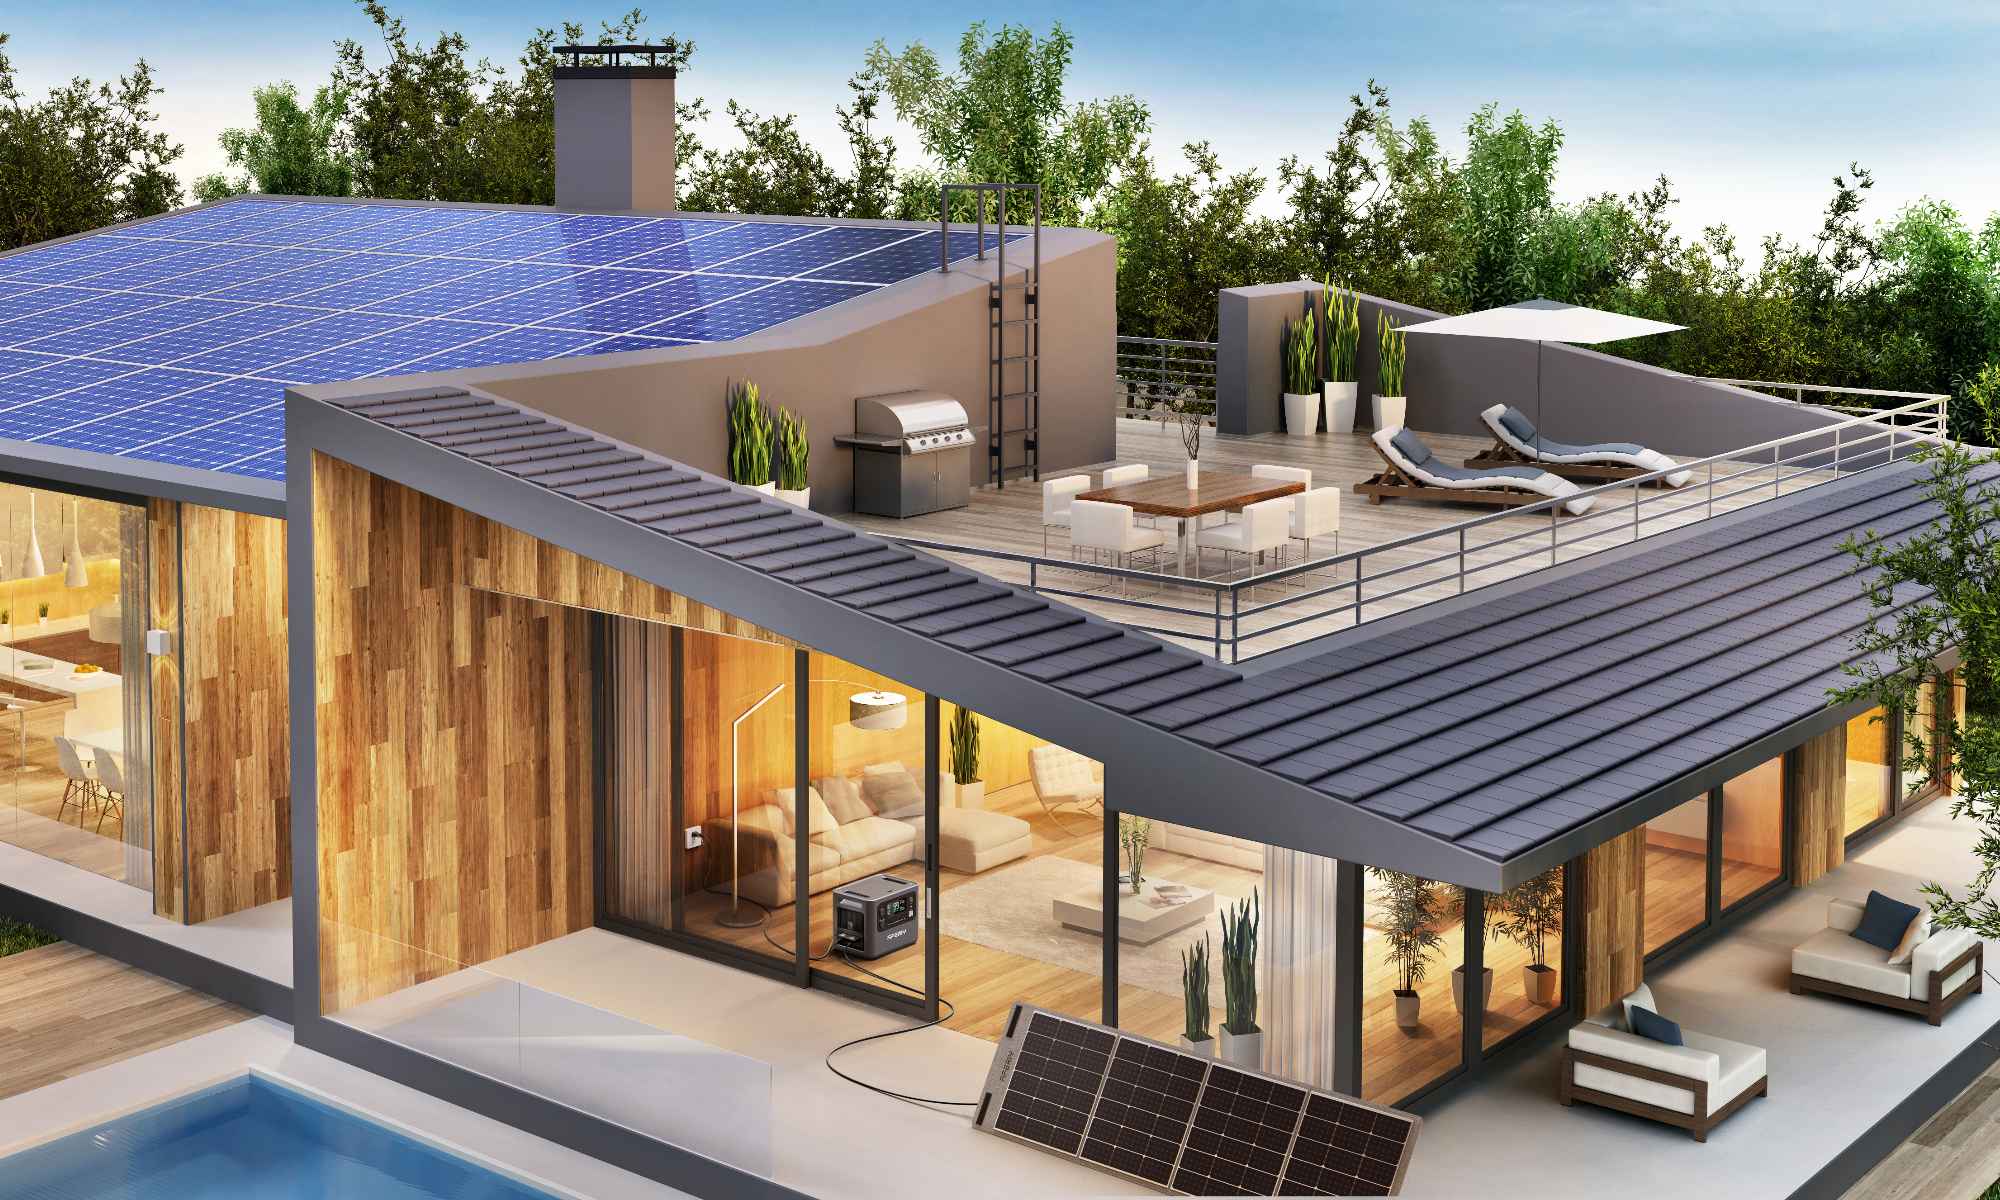 400W solar panels can still power the house during power outages.